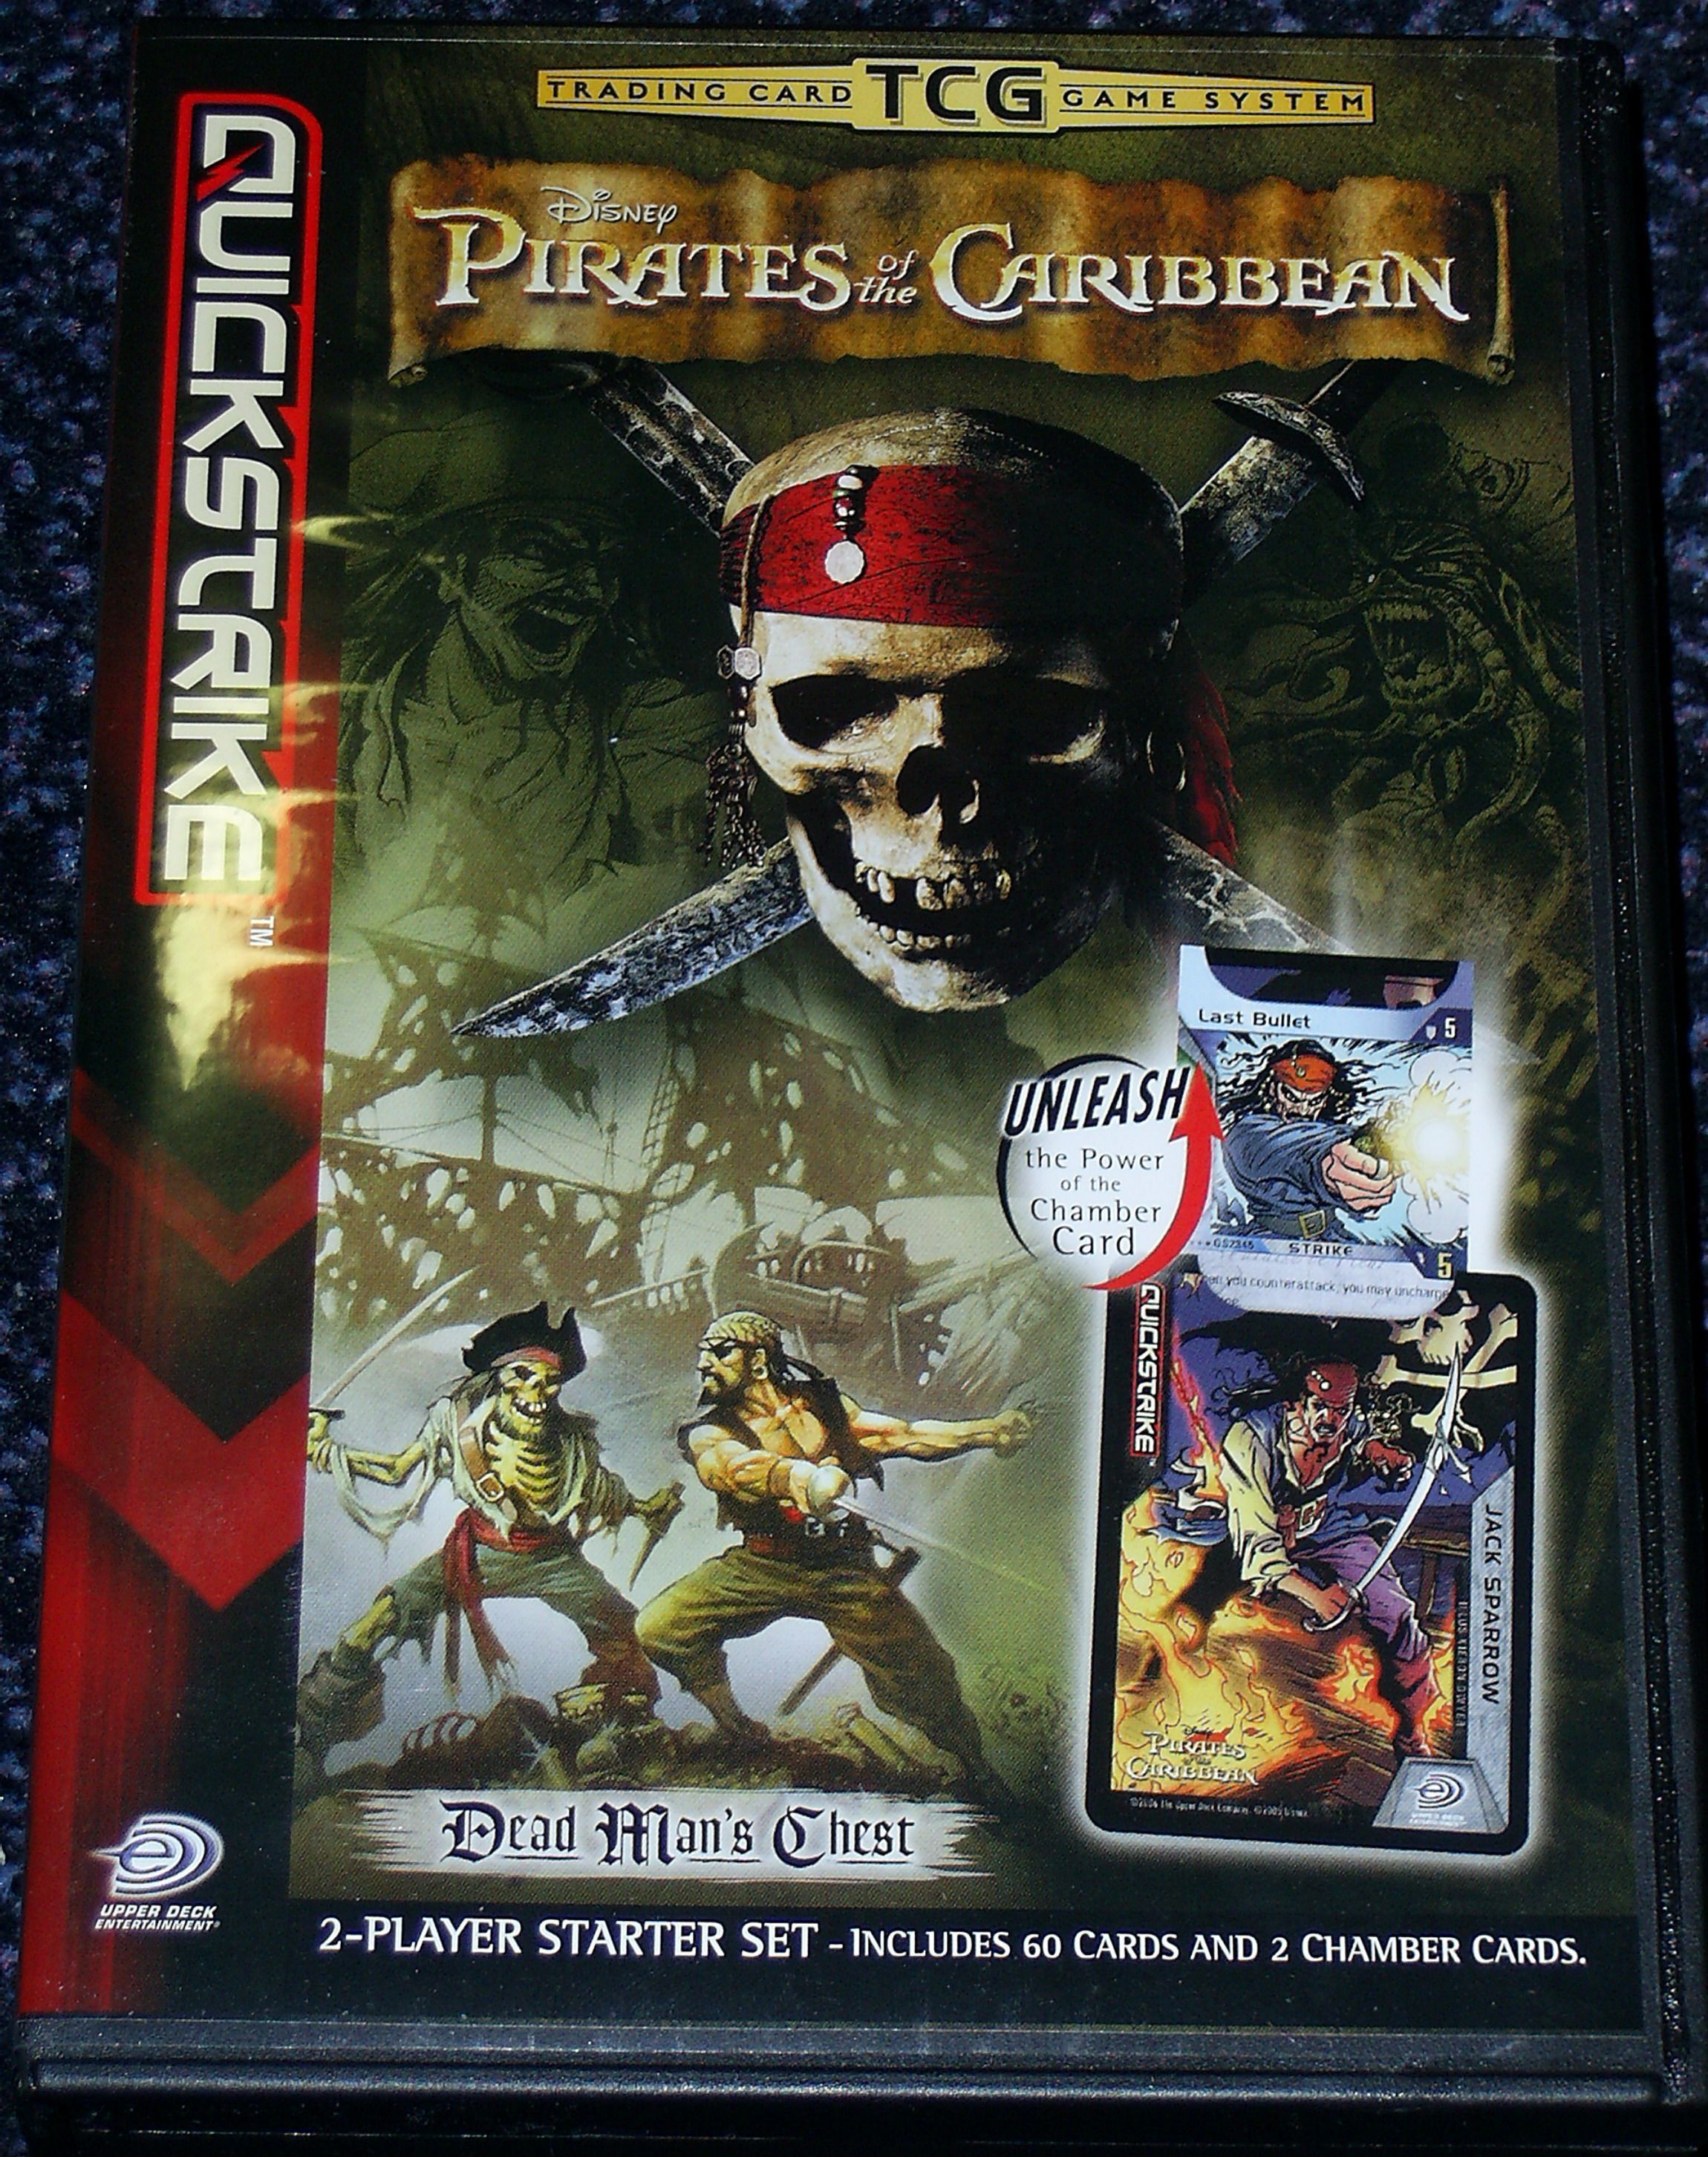 Pirates of the Caribbean: Trading Card Game